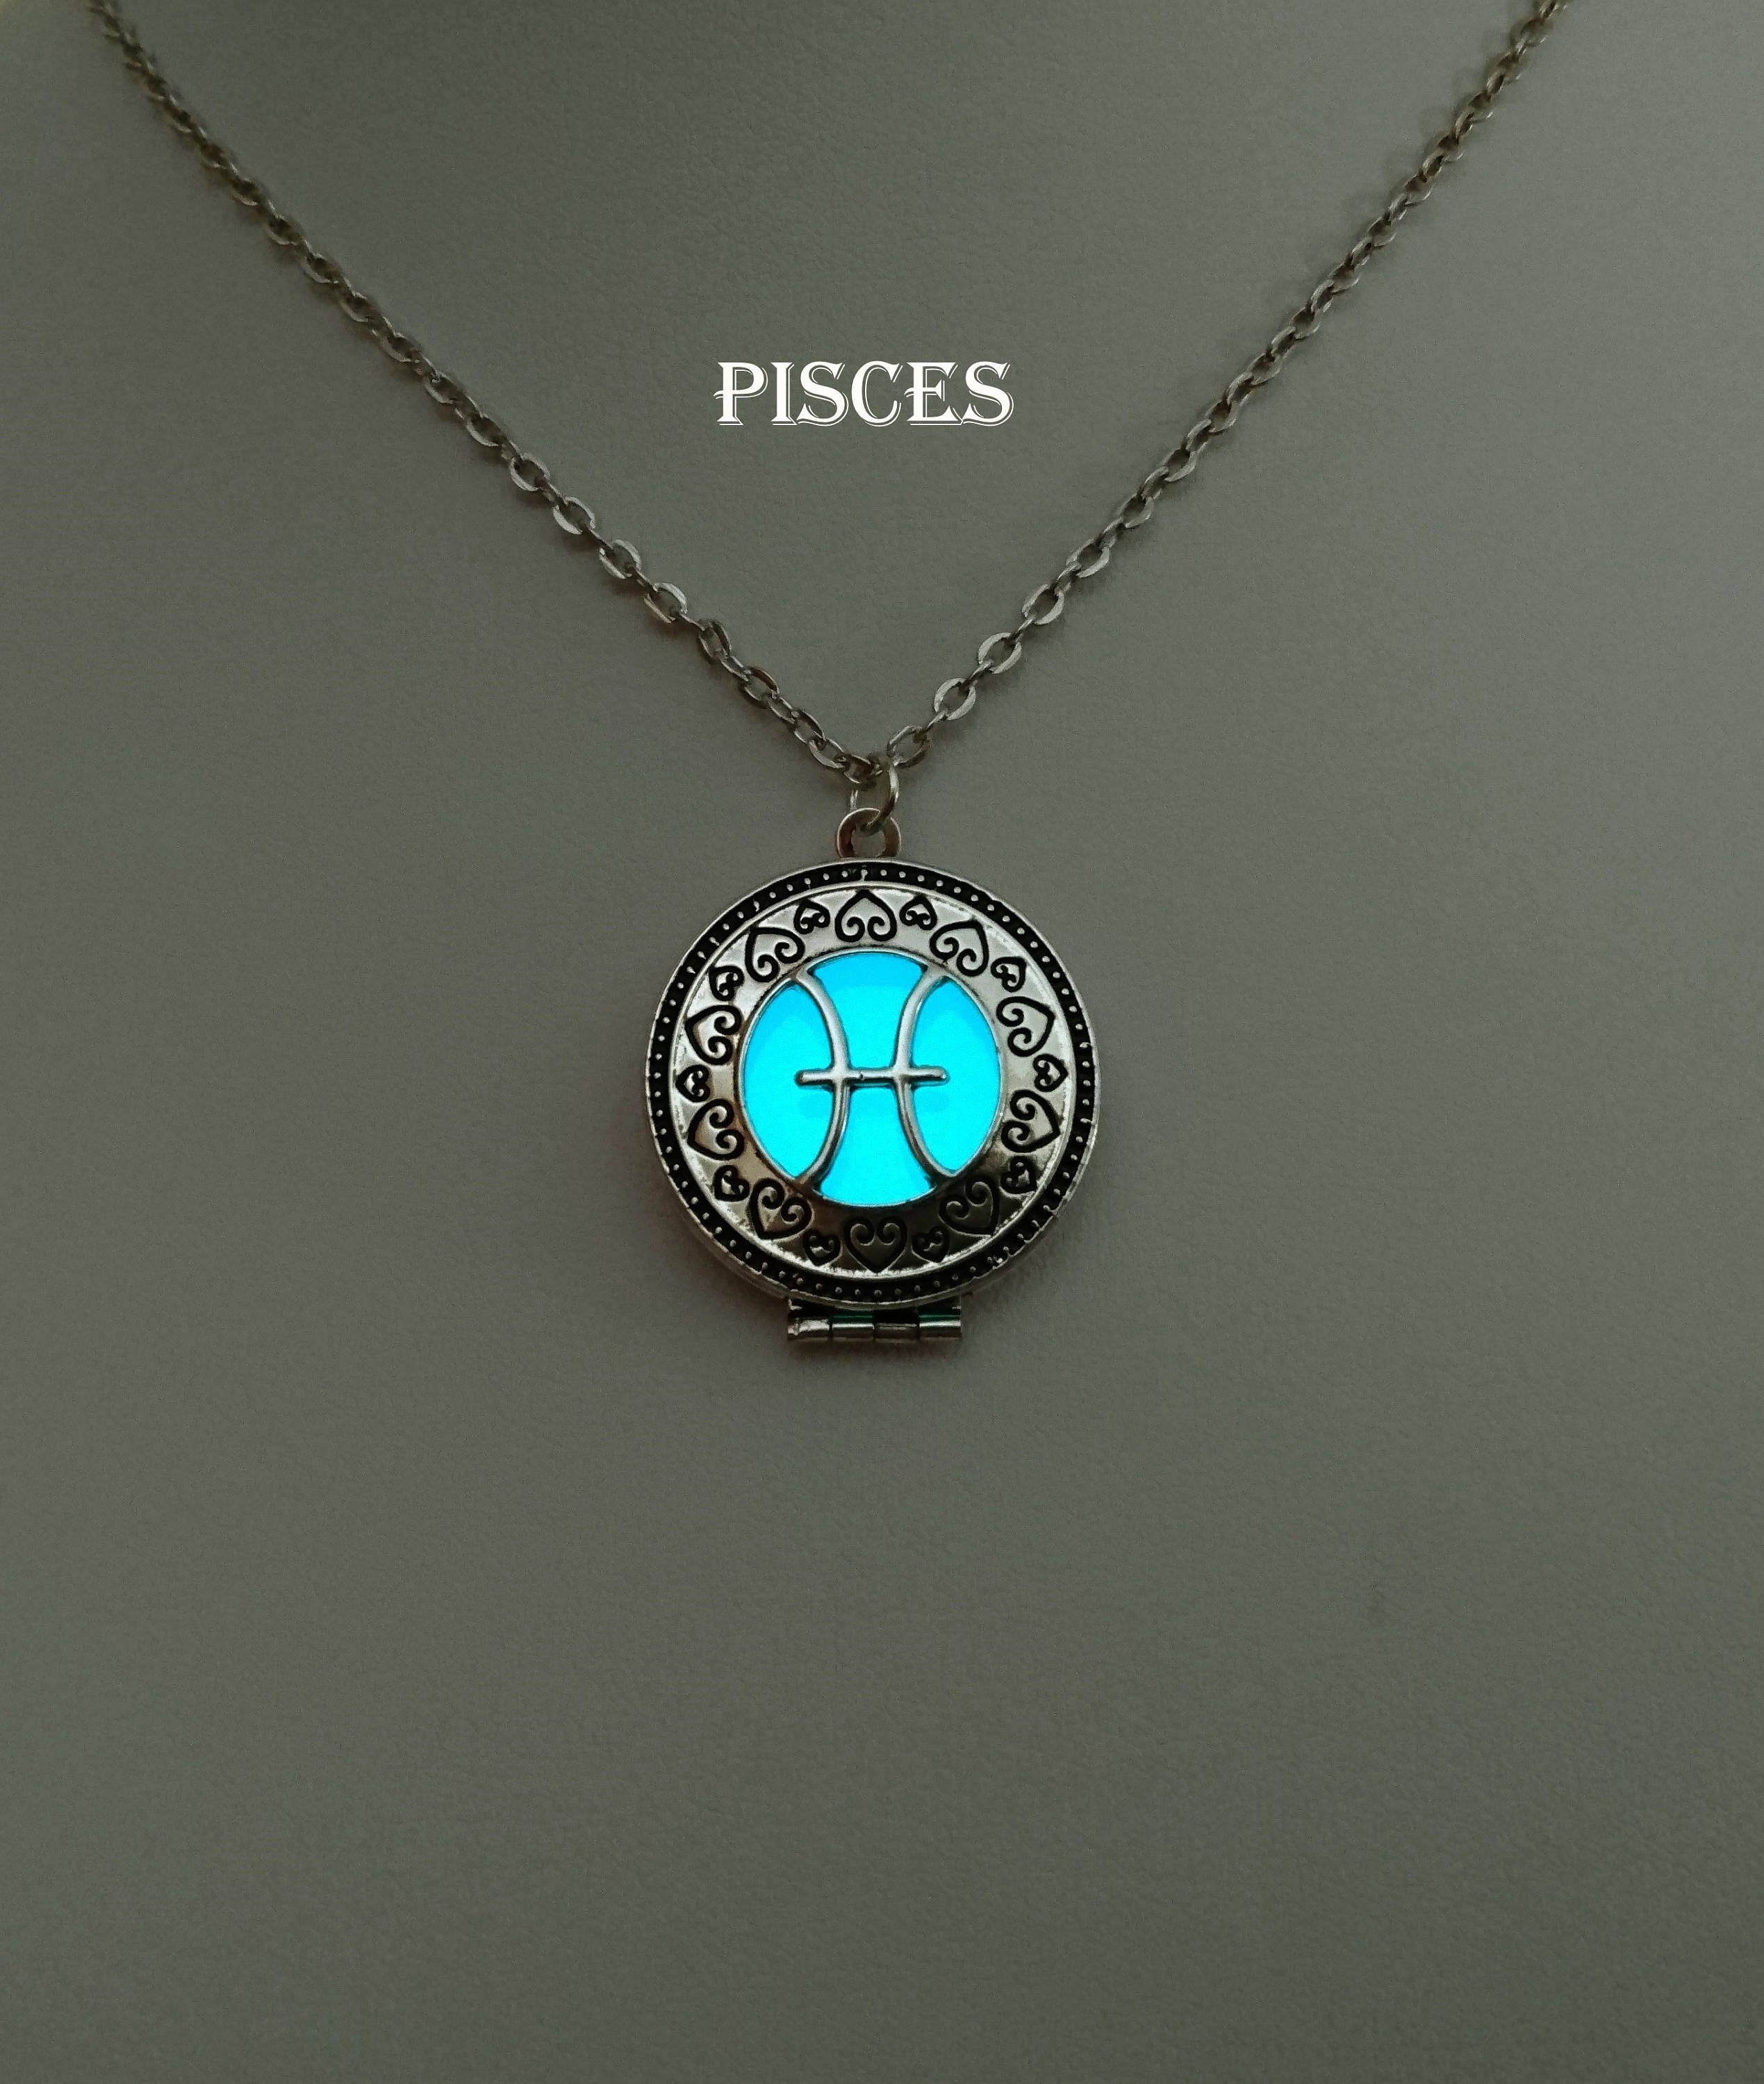 Glow in the Dark Galaxy Necklace 23 Images Glowing Space 